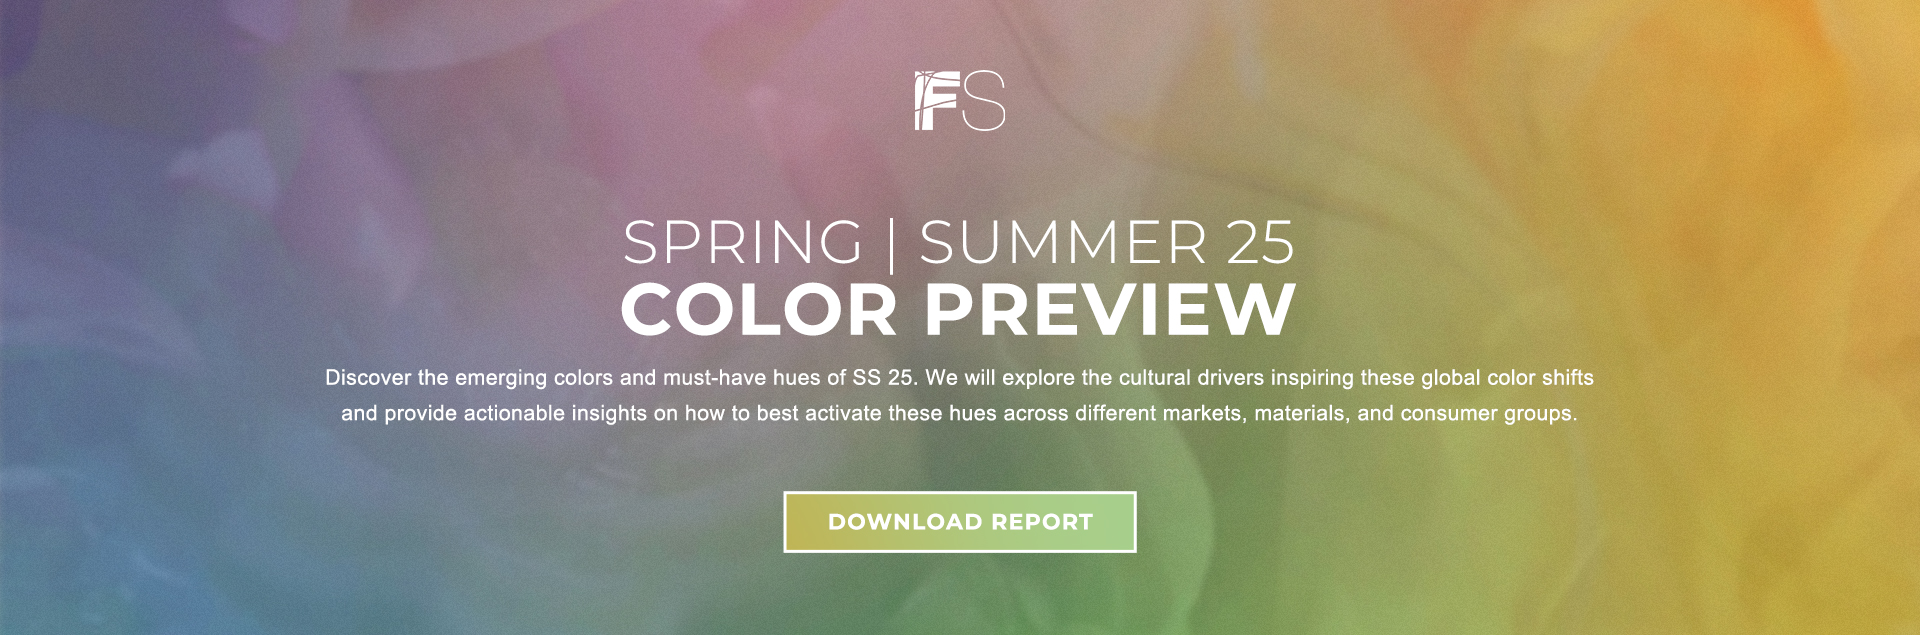 landing-page-Spring-_-Summer-25-Color-Preview_download-report